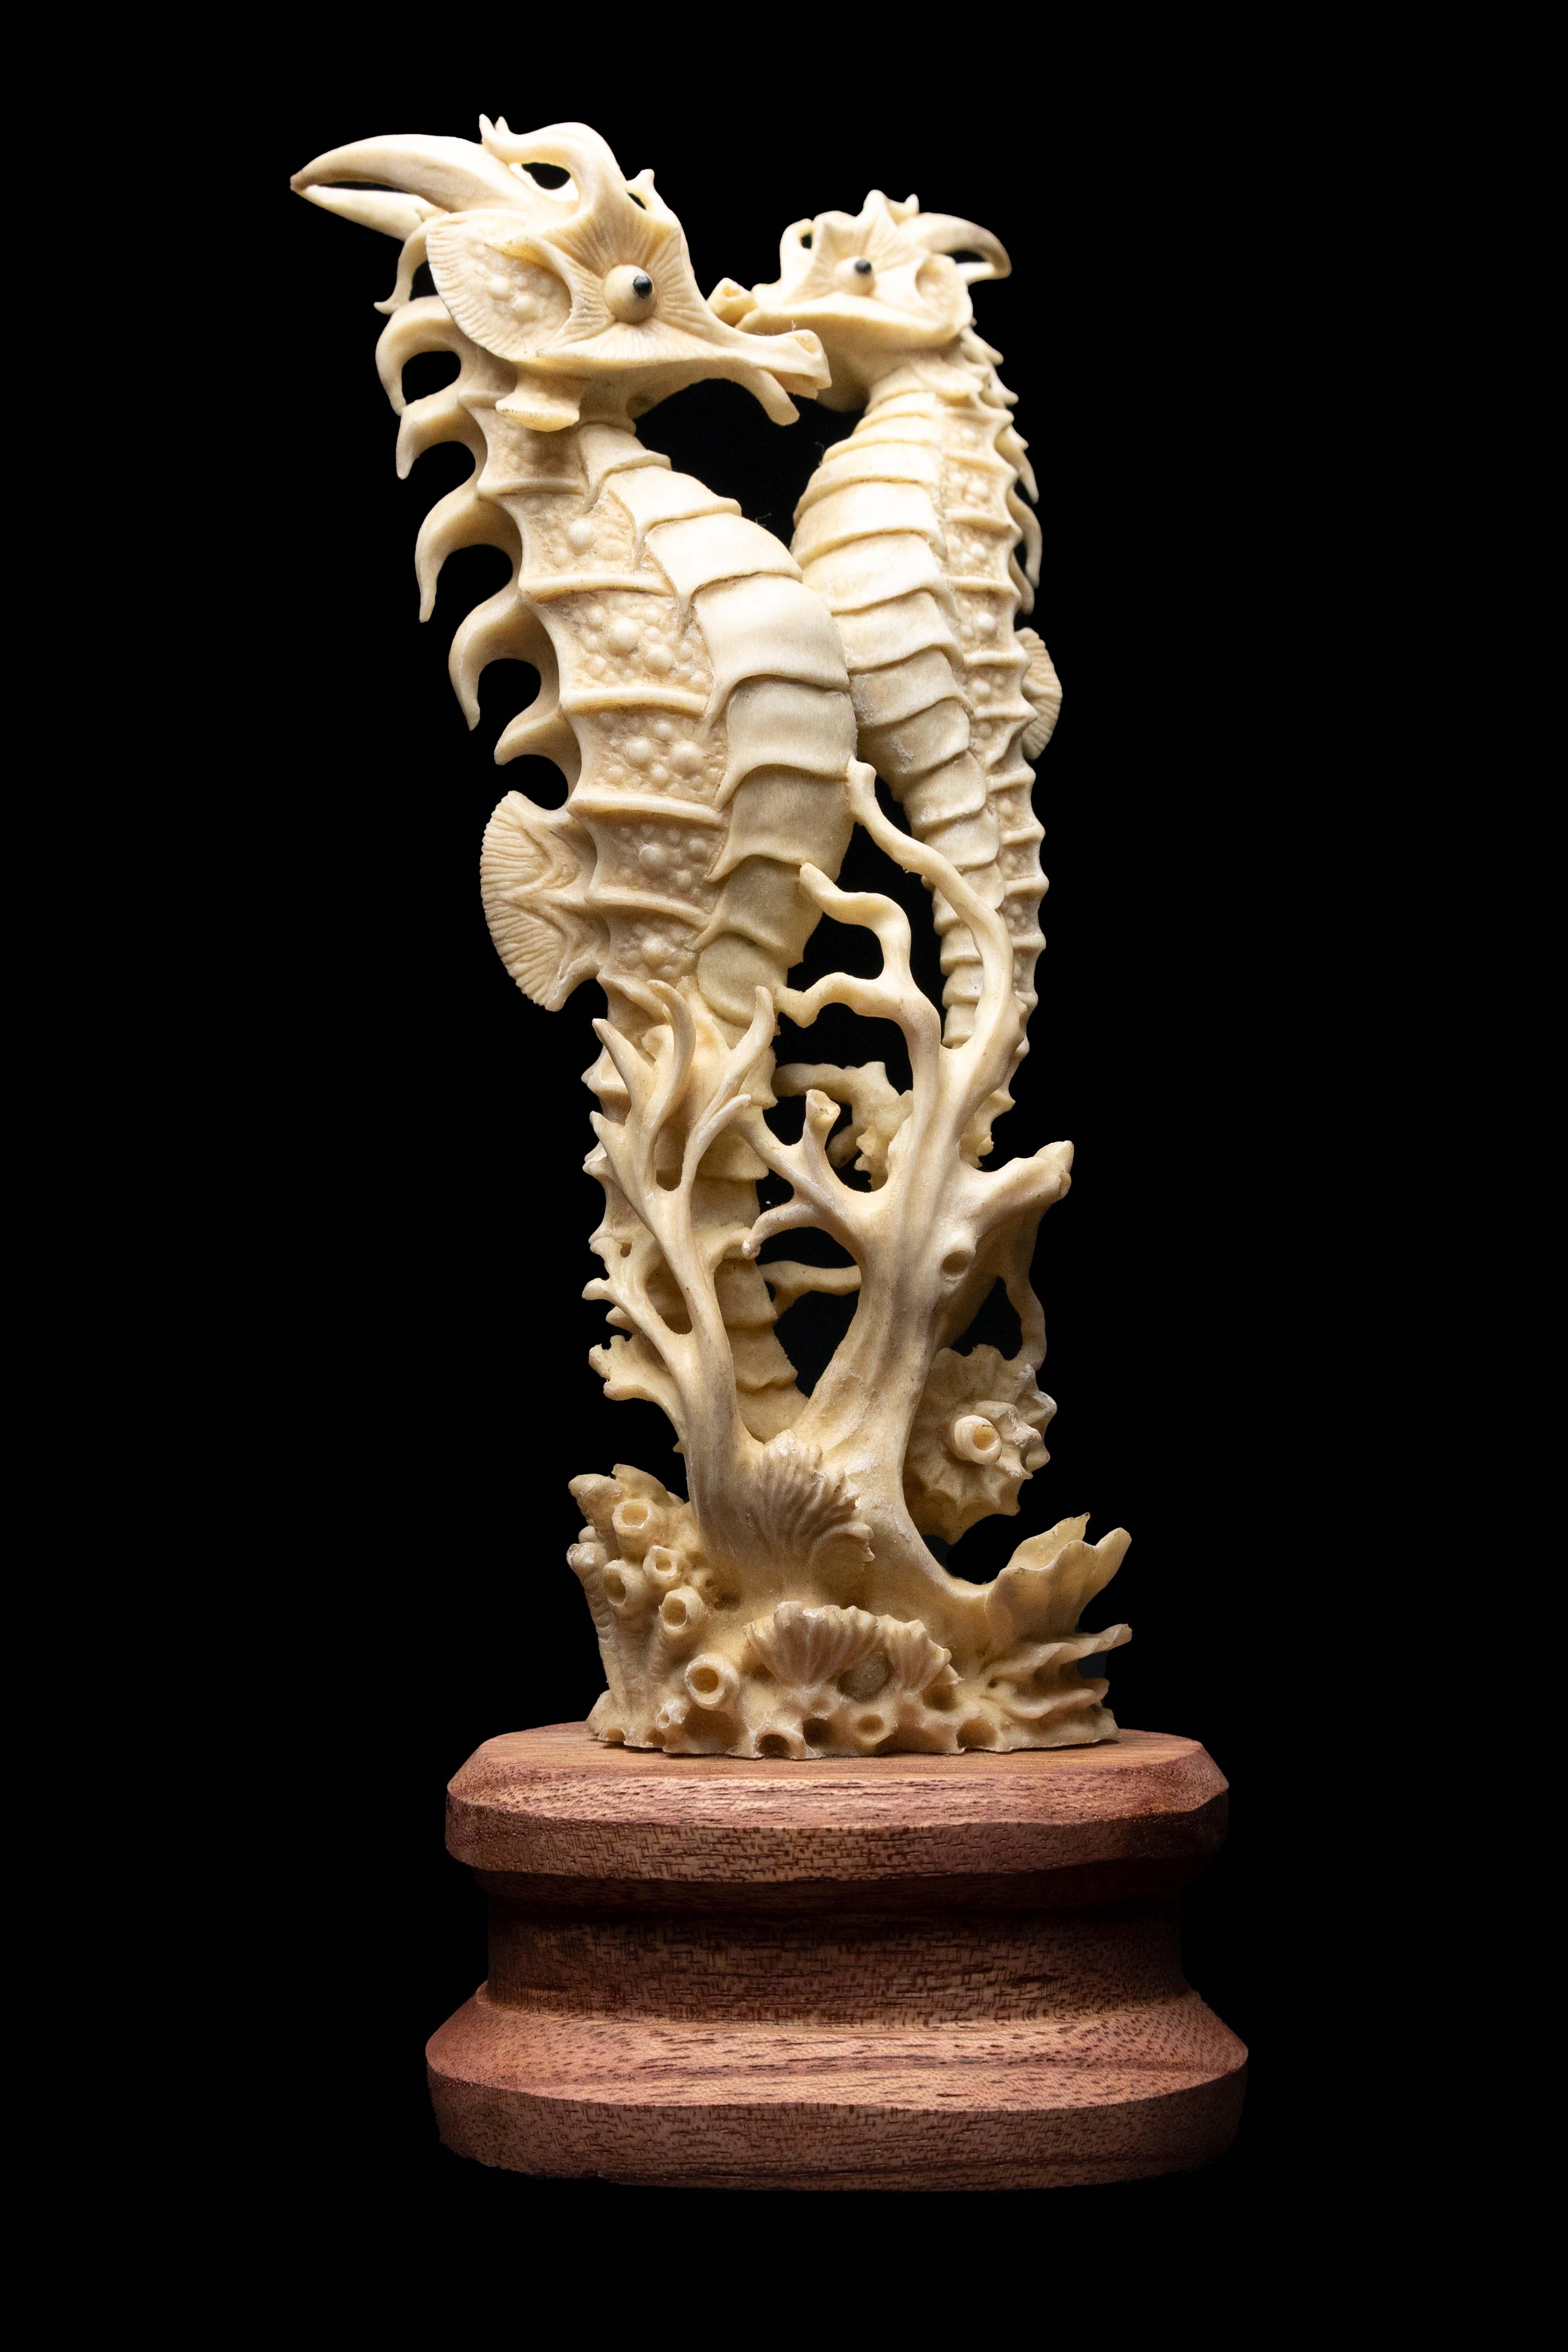 Carved moose antler Seahorse. Detailed moose antler carving of a Seahorse, from Indonesia. This is a one of a kind object. The moose antler was sourced in North America and then sent to Asia for carving. Quality of ivory, but with sustainability, as